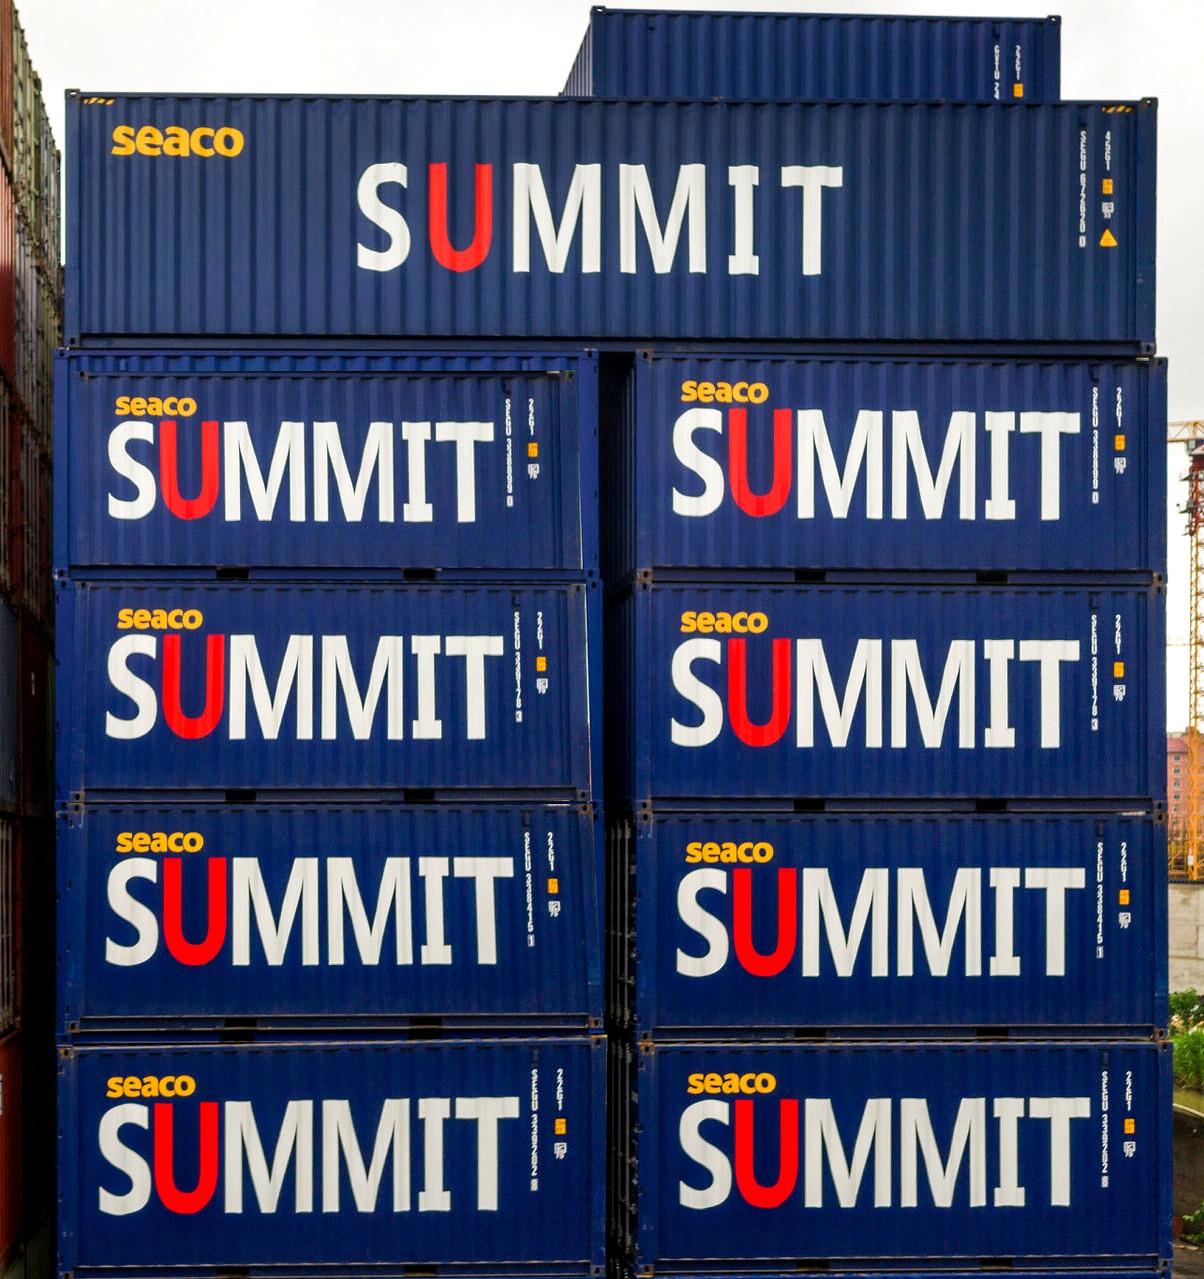 Why Choose Summit Shipping Line?